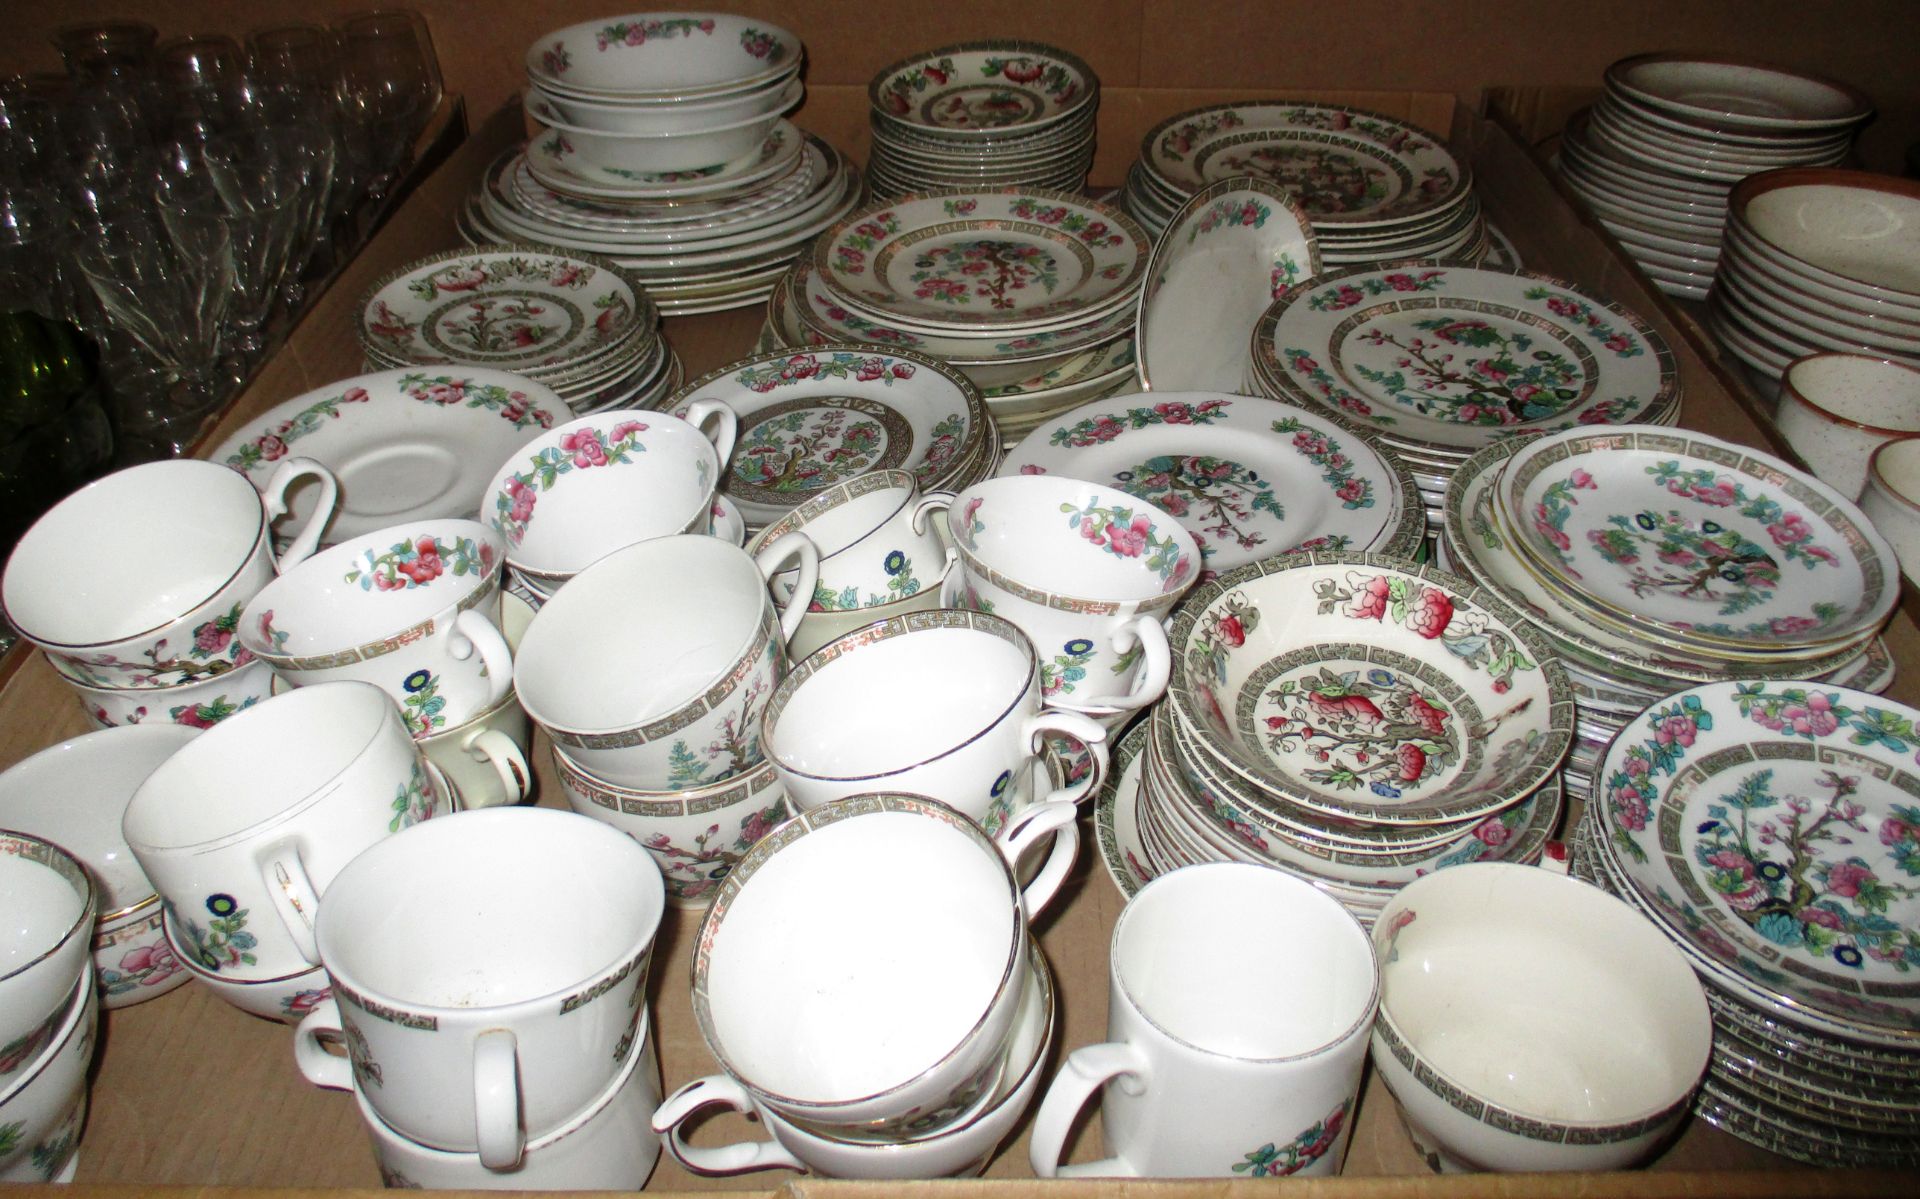 133 x pieces of "Indian Tree" and Indian Tree style patterned tea/dinner service